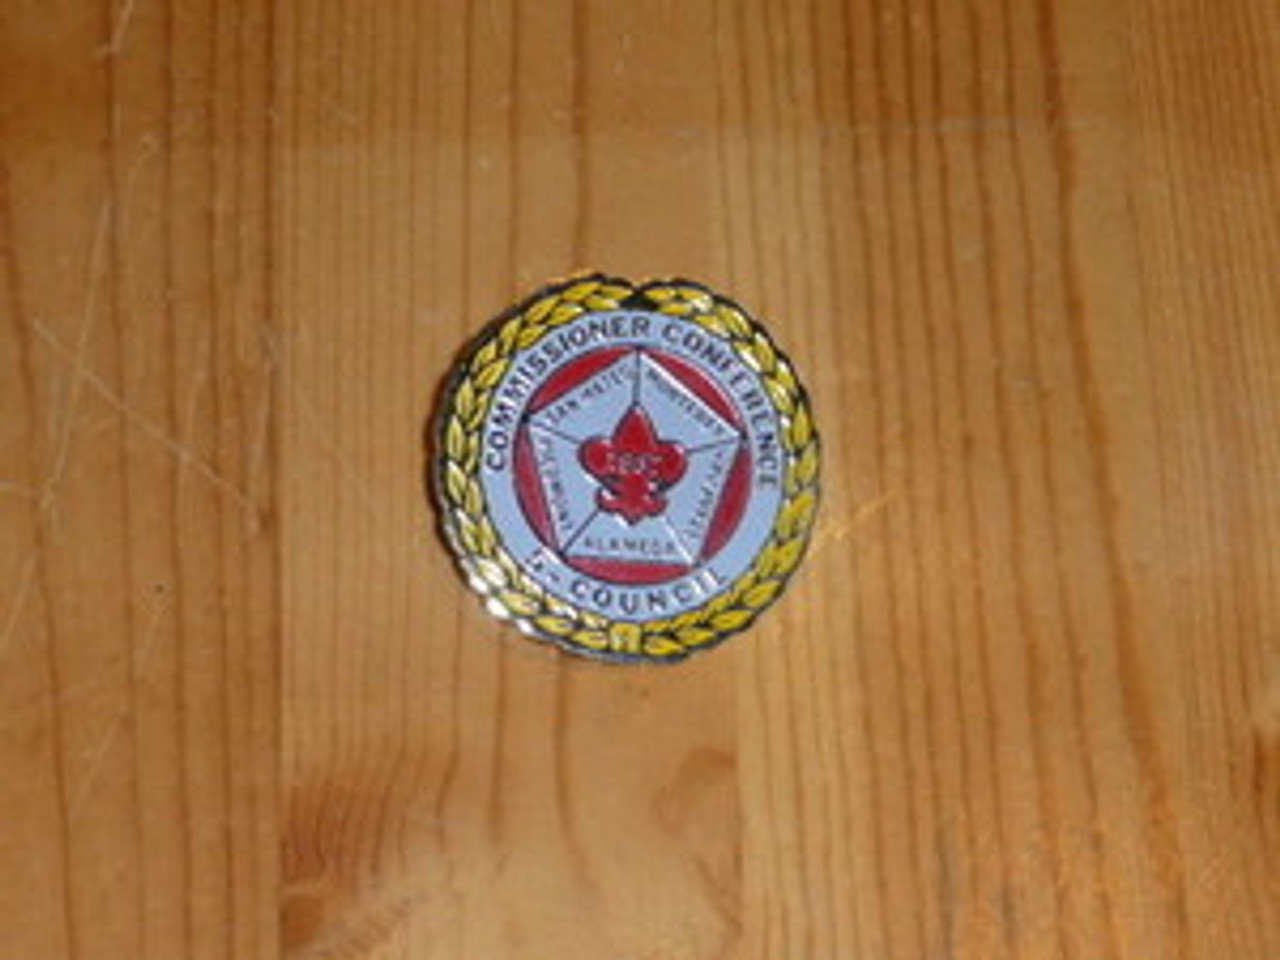 1987 Commissioner Conference Pin 5 No. Cal. Councils - Scout